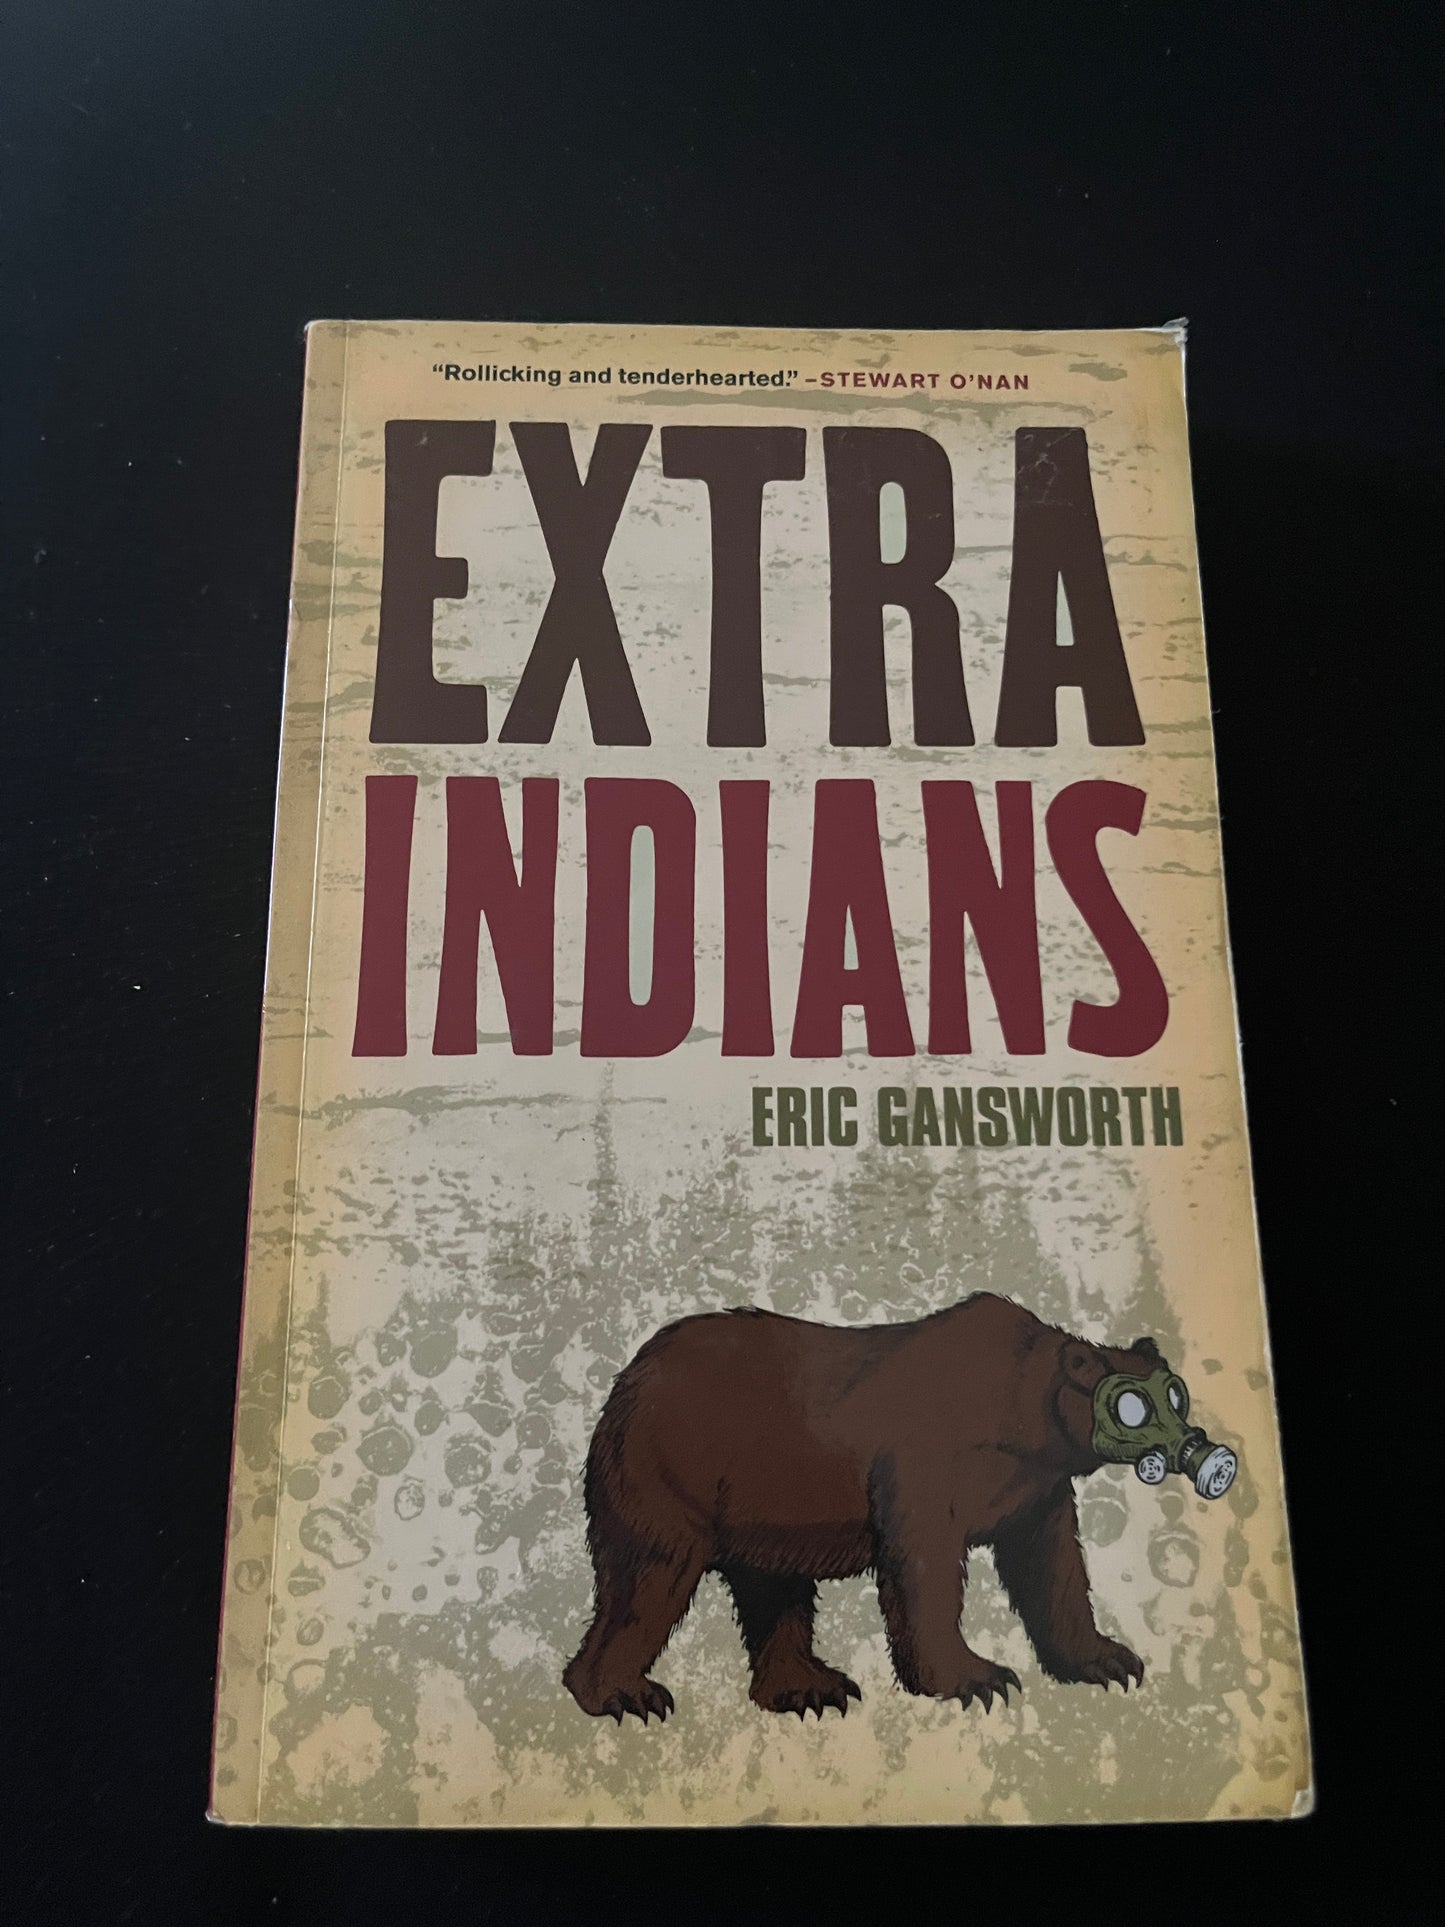 EXTRA INDIANS by Eric Gansworth